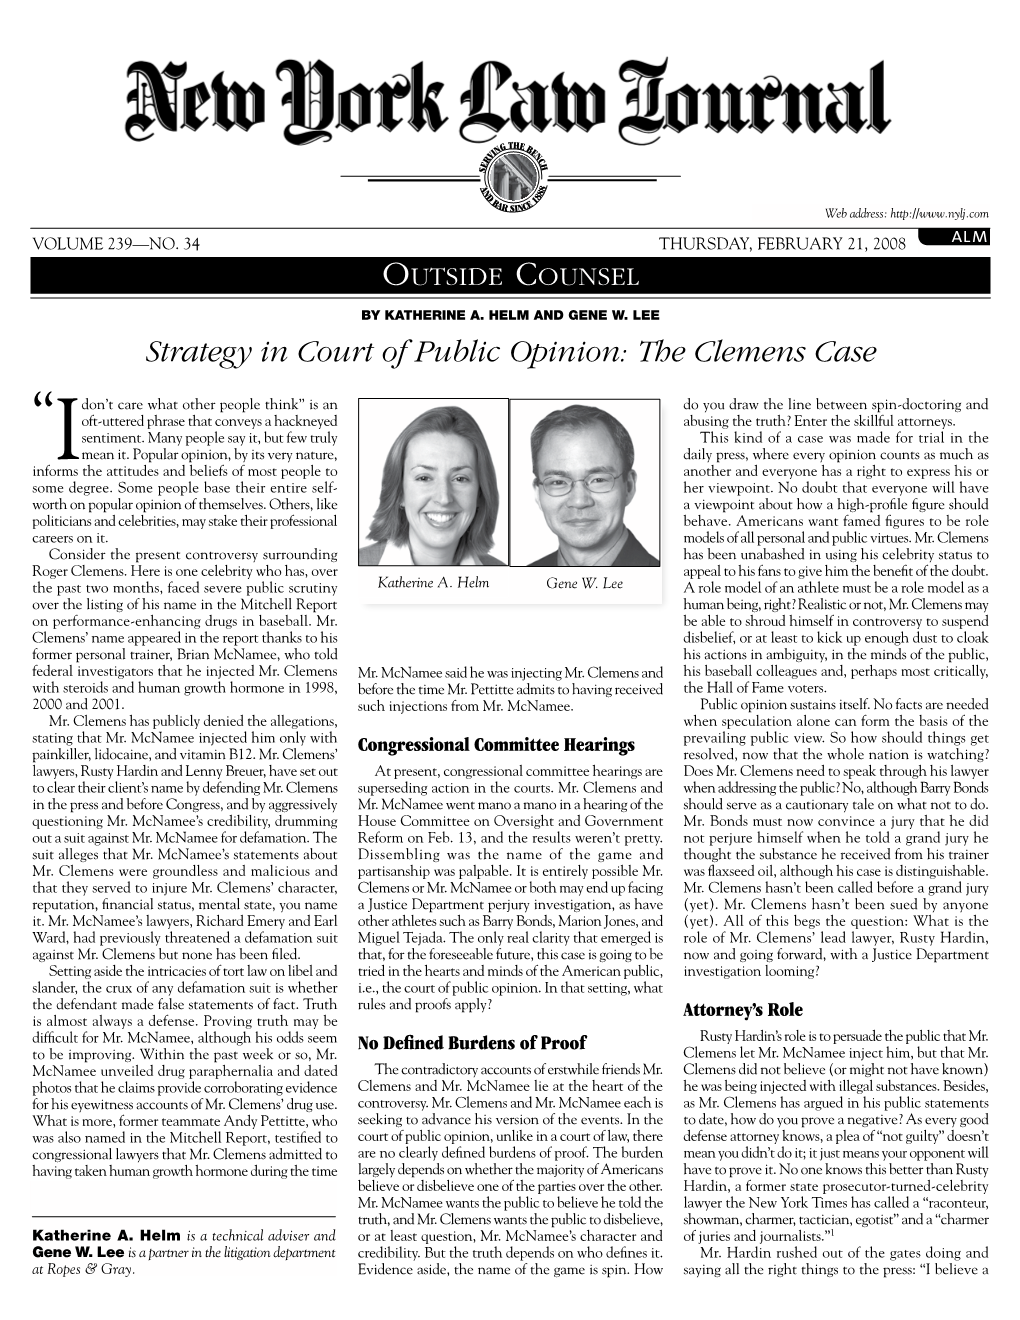 Strategy in Court of Public Opinion: the Clemens Case